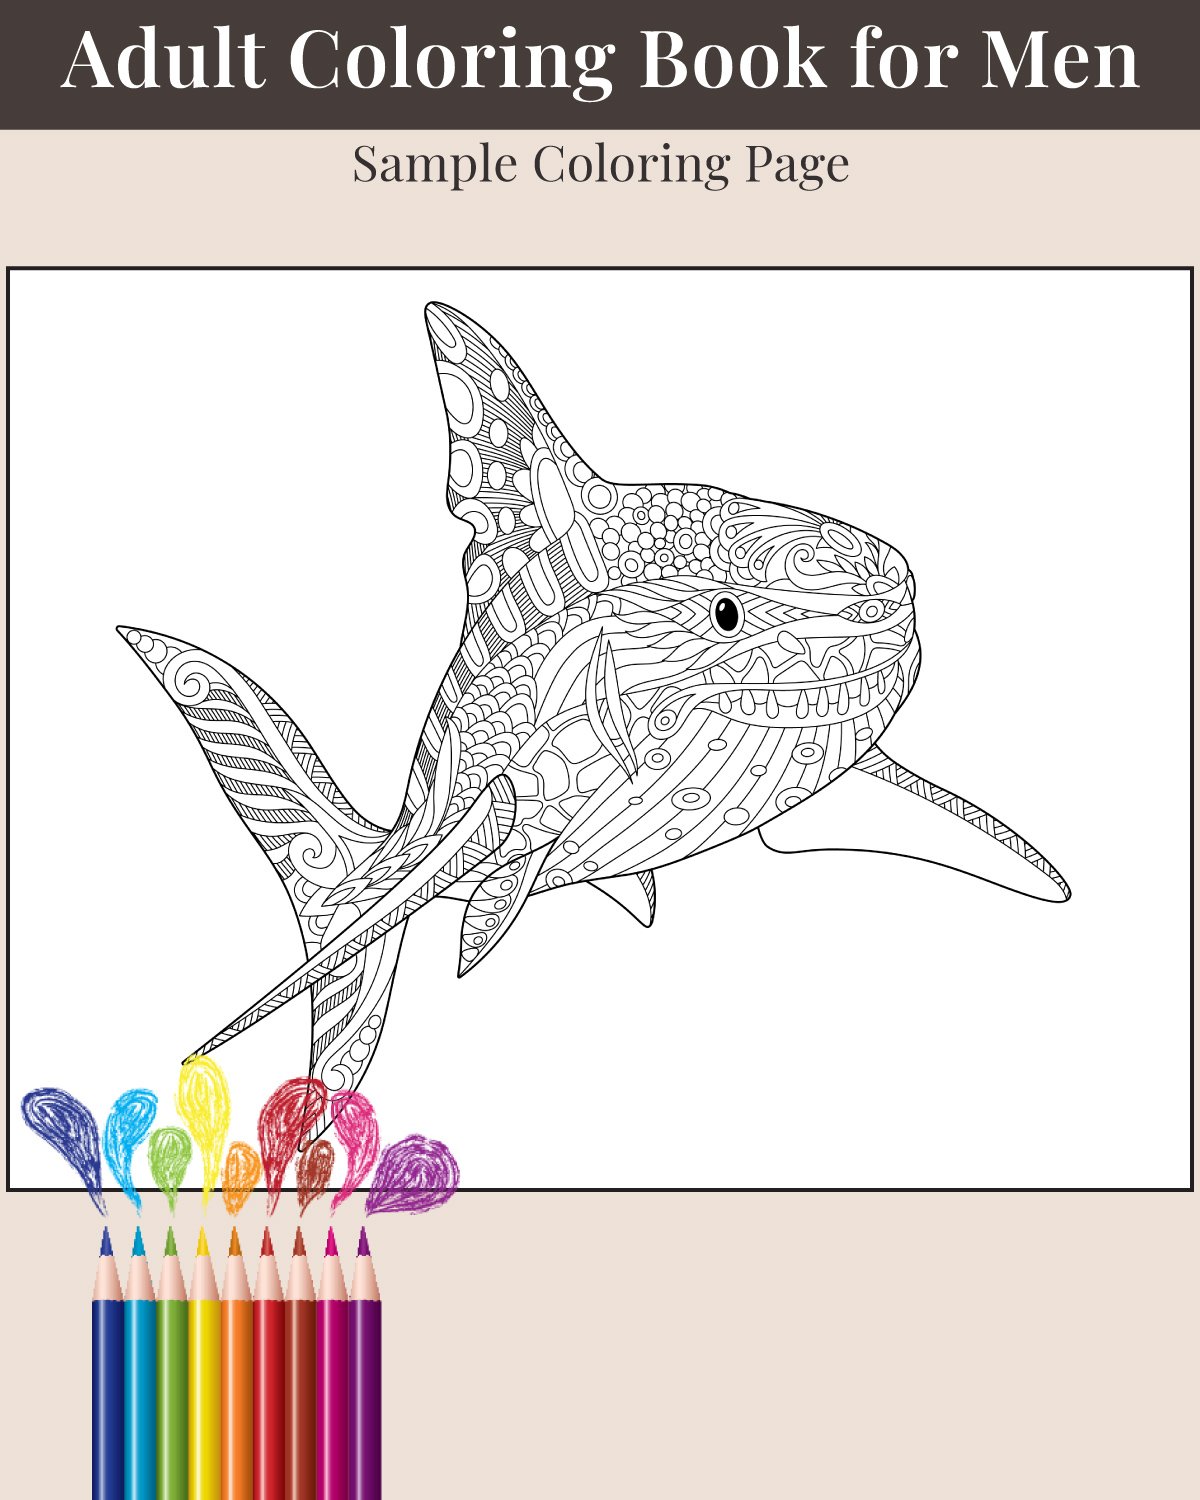 The-Ultimate-Adult-Coloring-Book-for-Men-Vol2-Sample-02